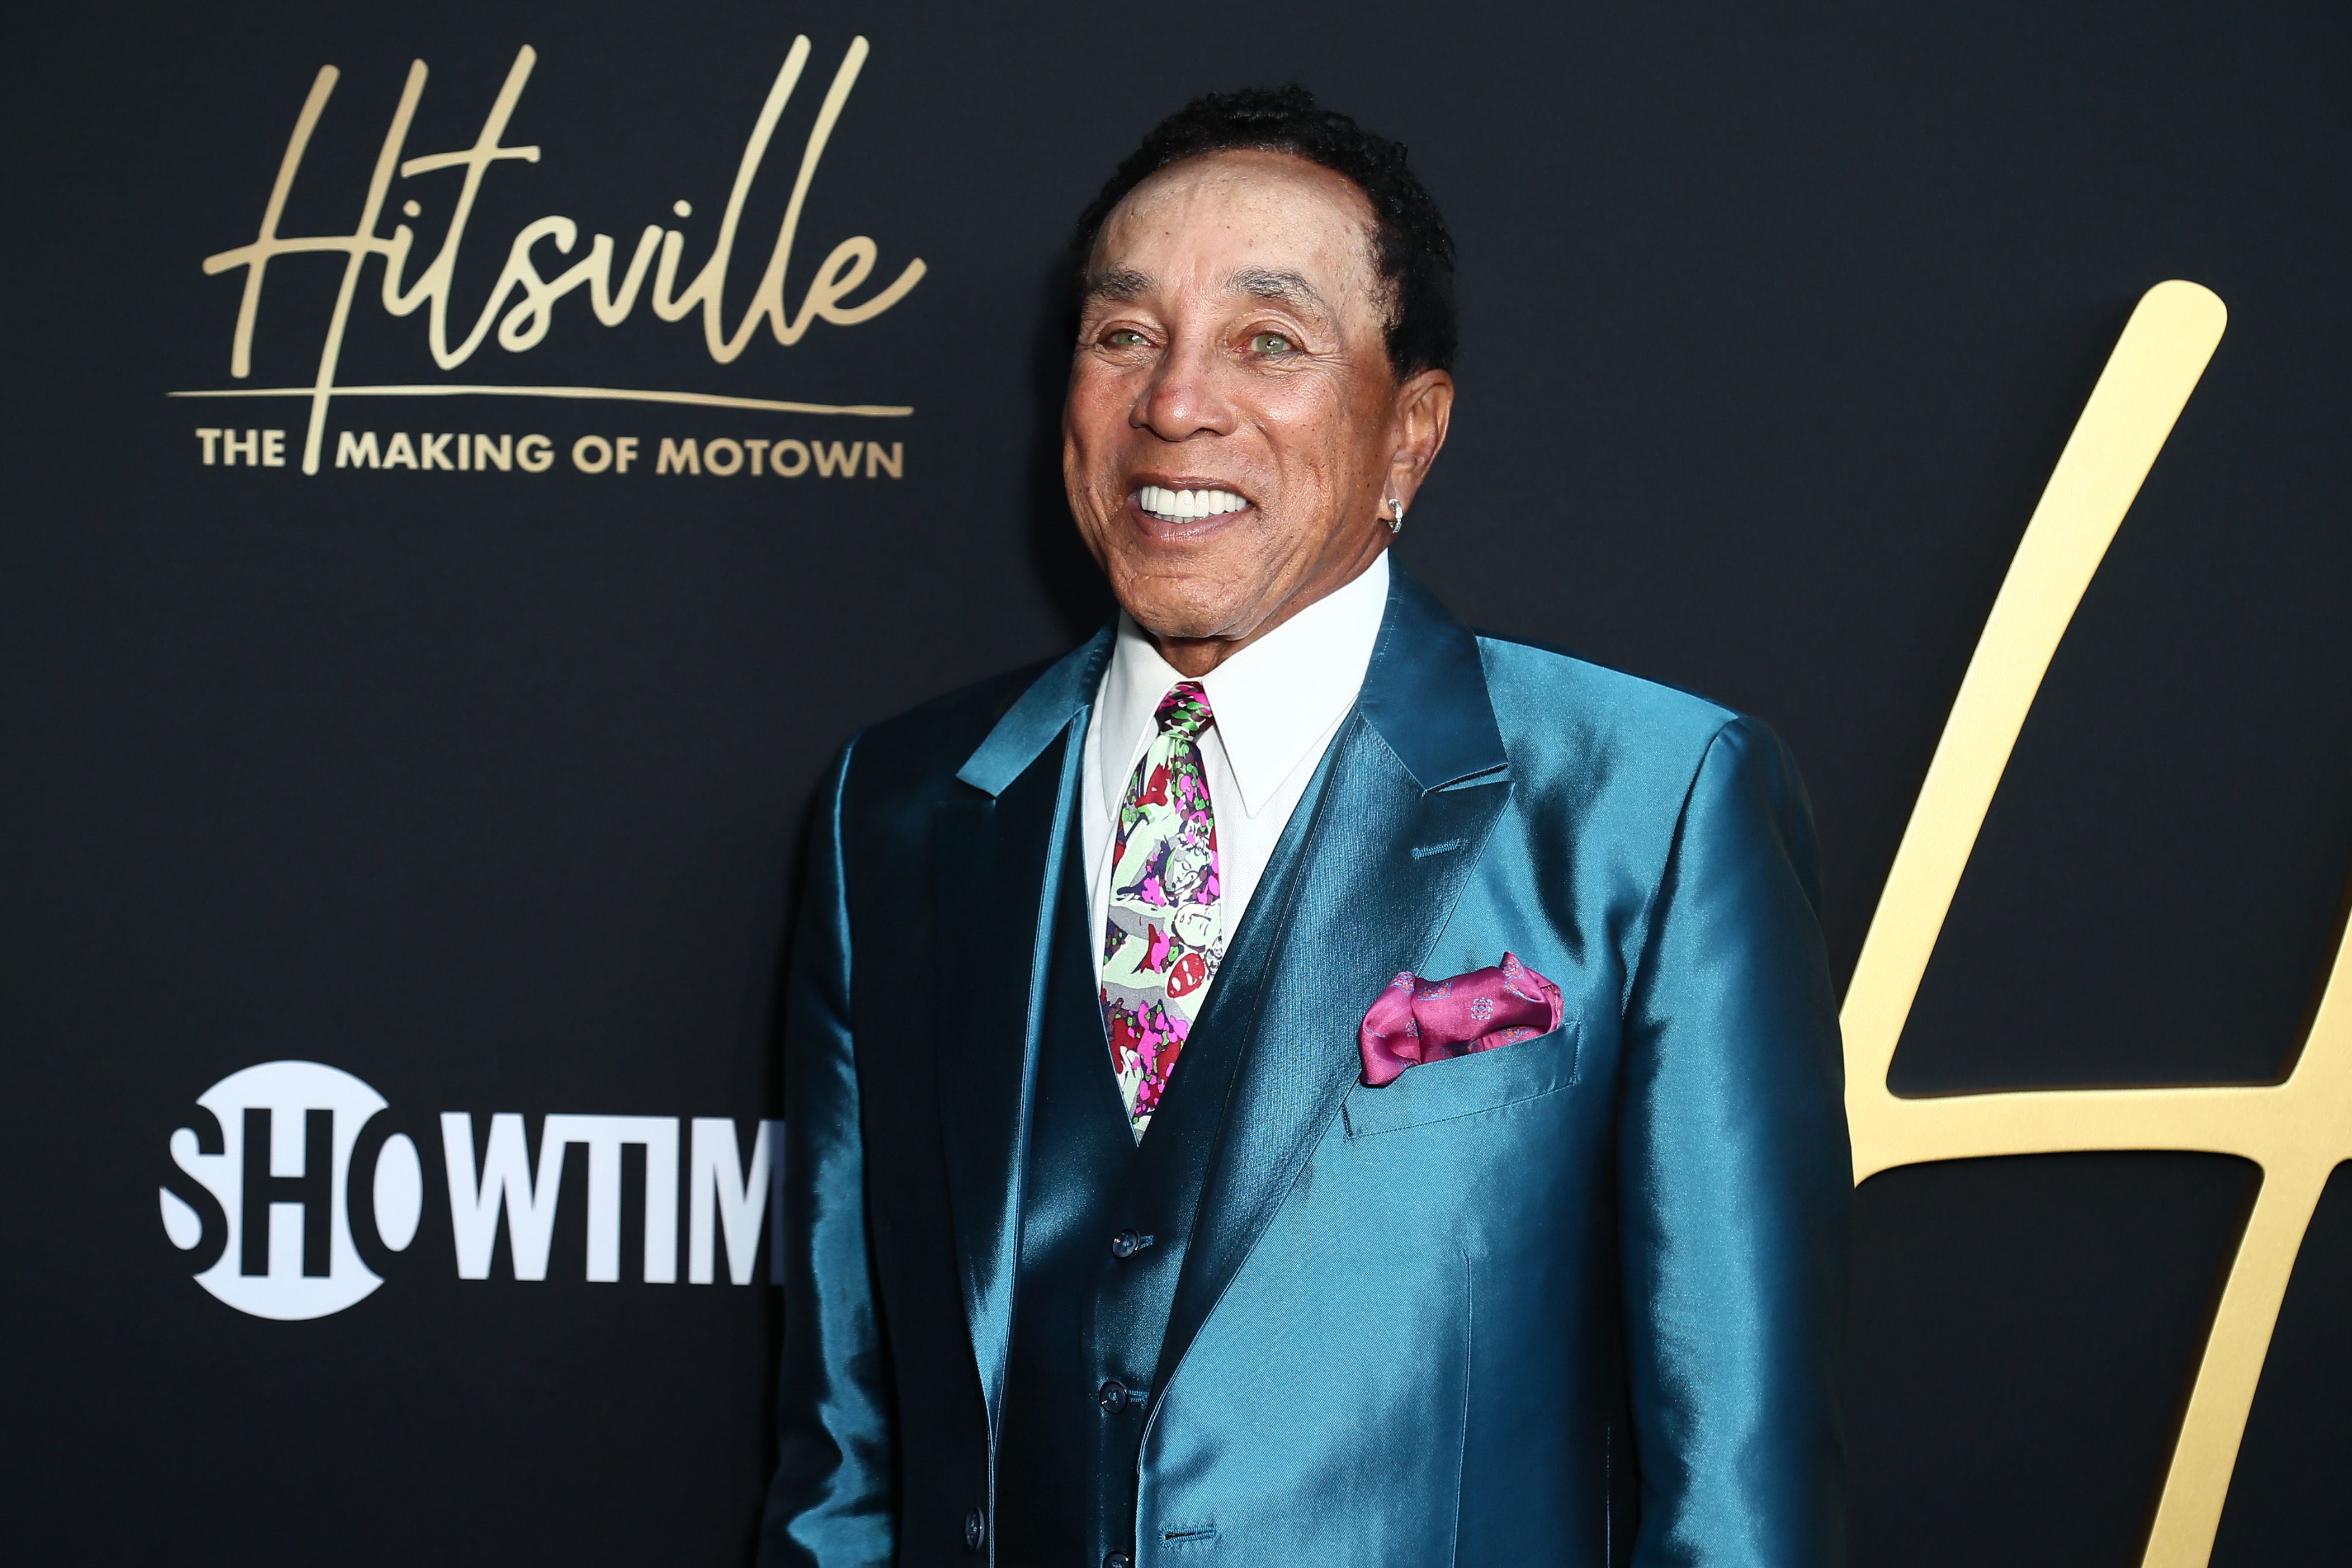 Smokey Robinson attends the Premiere Of Showtime's "Hitsville: The Making Of Motown" at Harmony Gold on August 08, 2019 | Photo: Getty Images